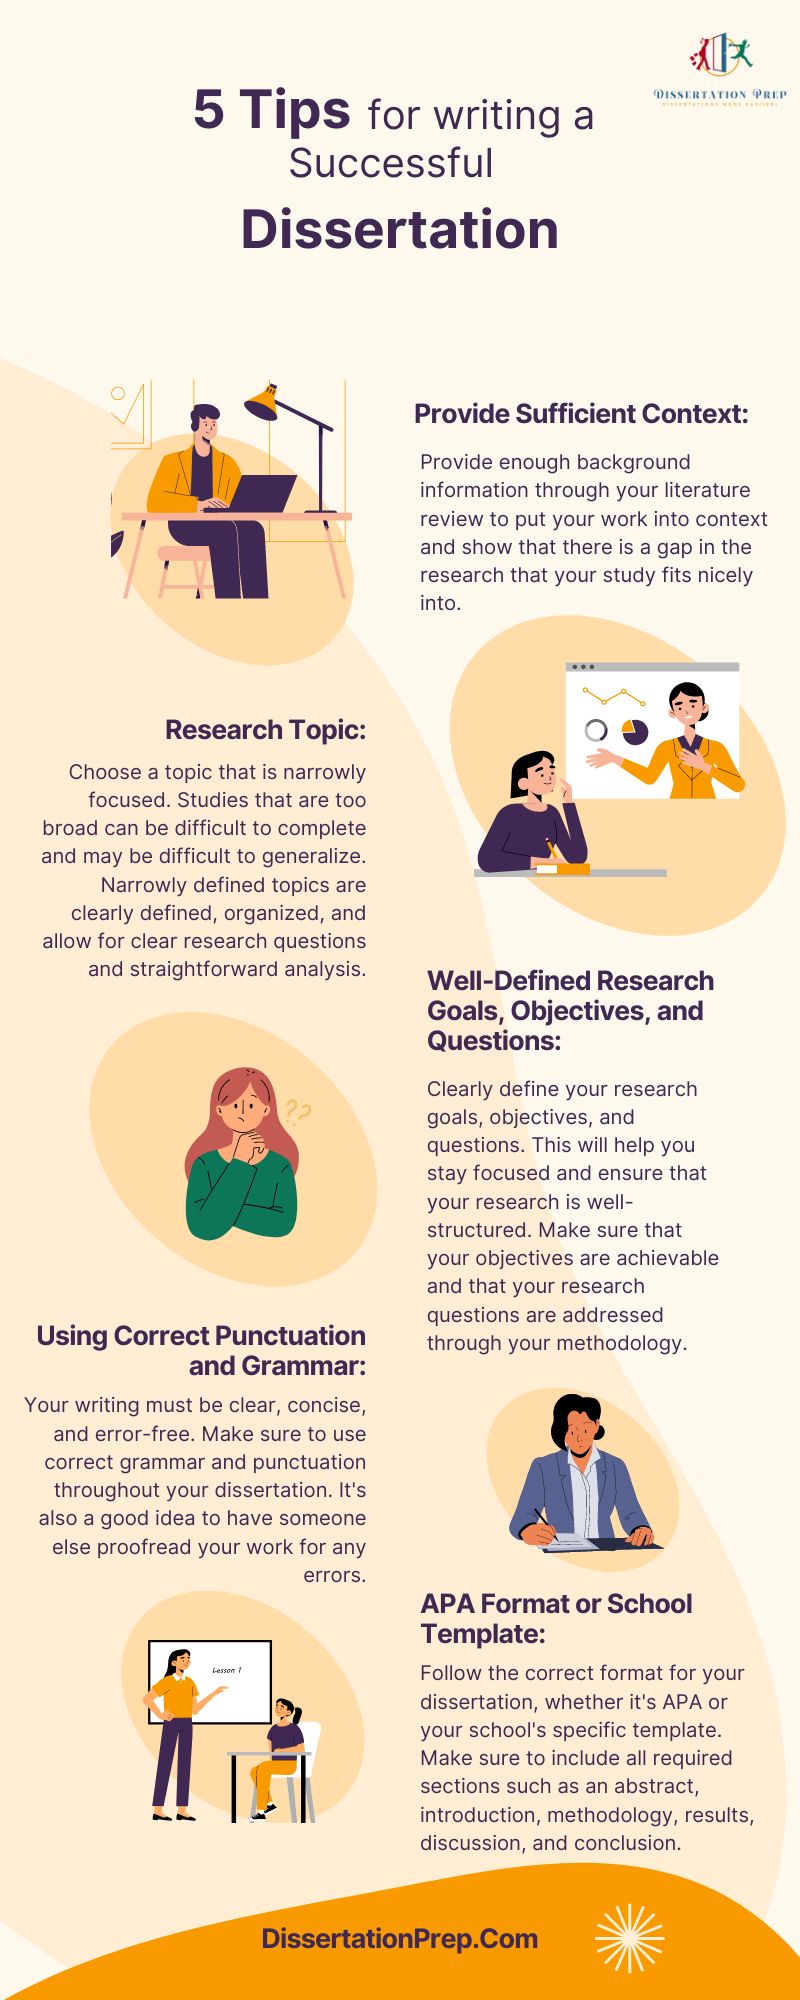 5 Tips for Writing a Successful Dissertation Infographic